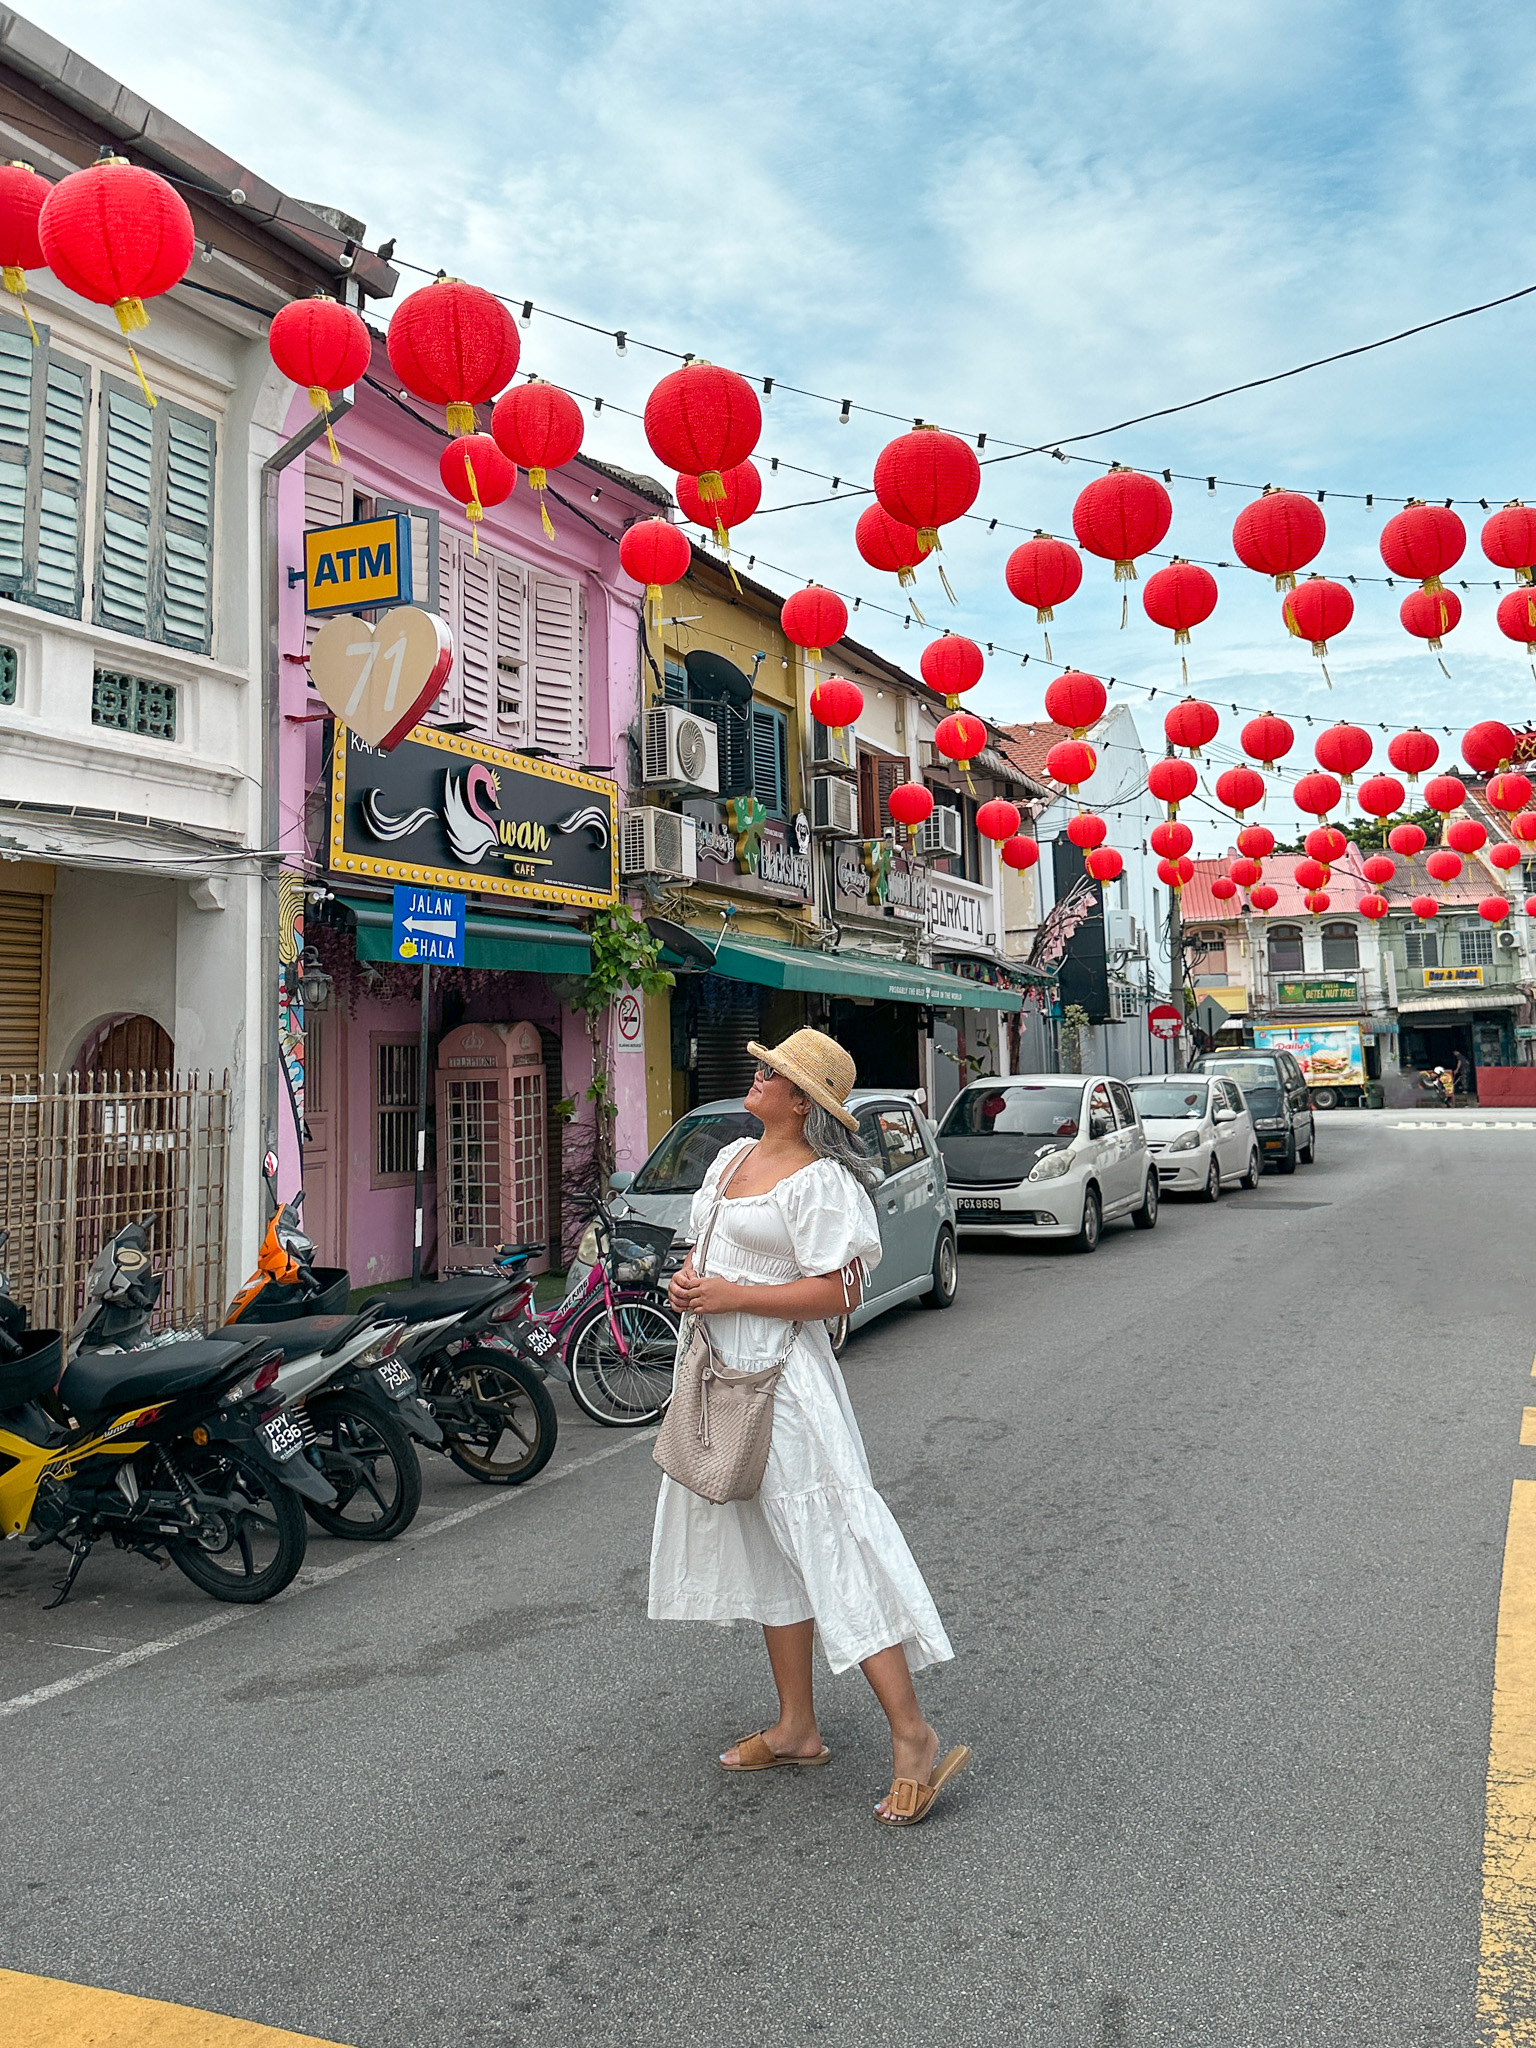 Penang Georgetown Travel Guide | What to See, Do, and Eat